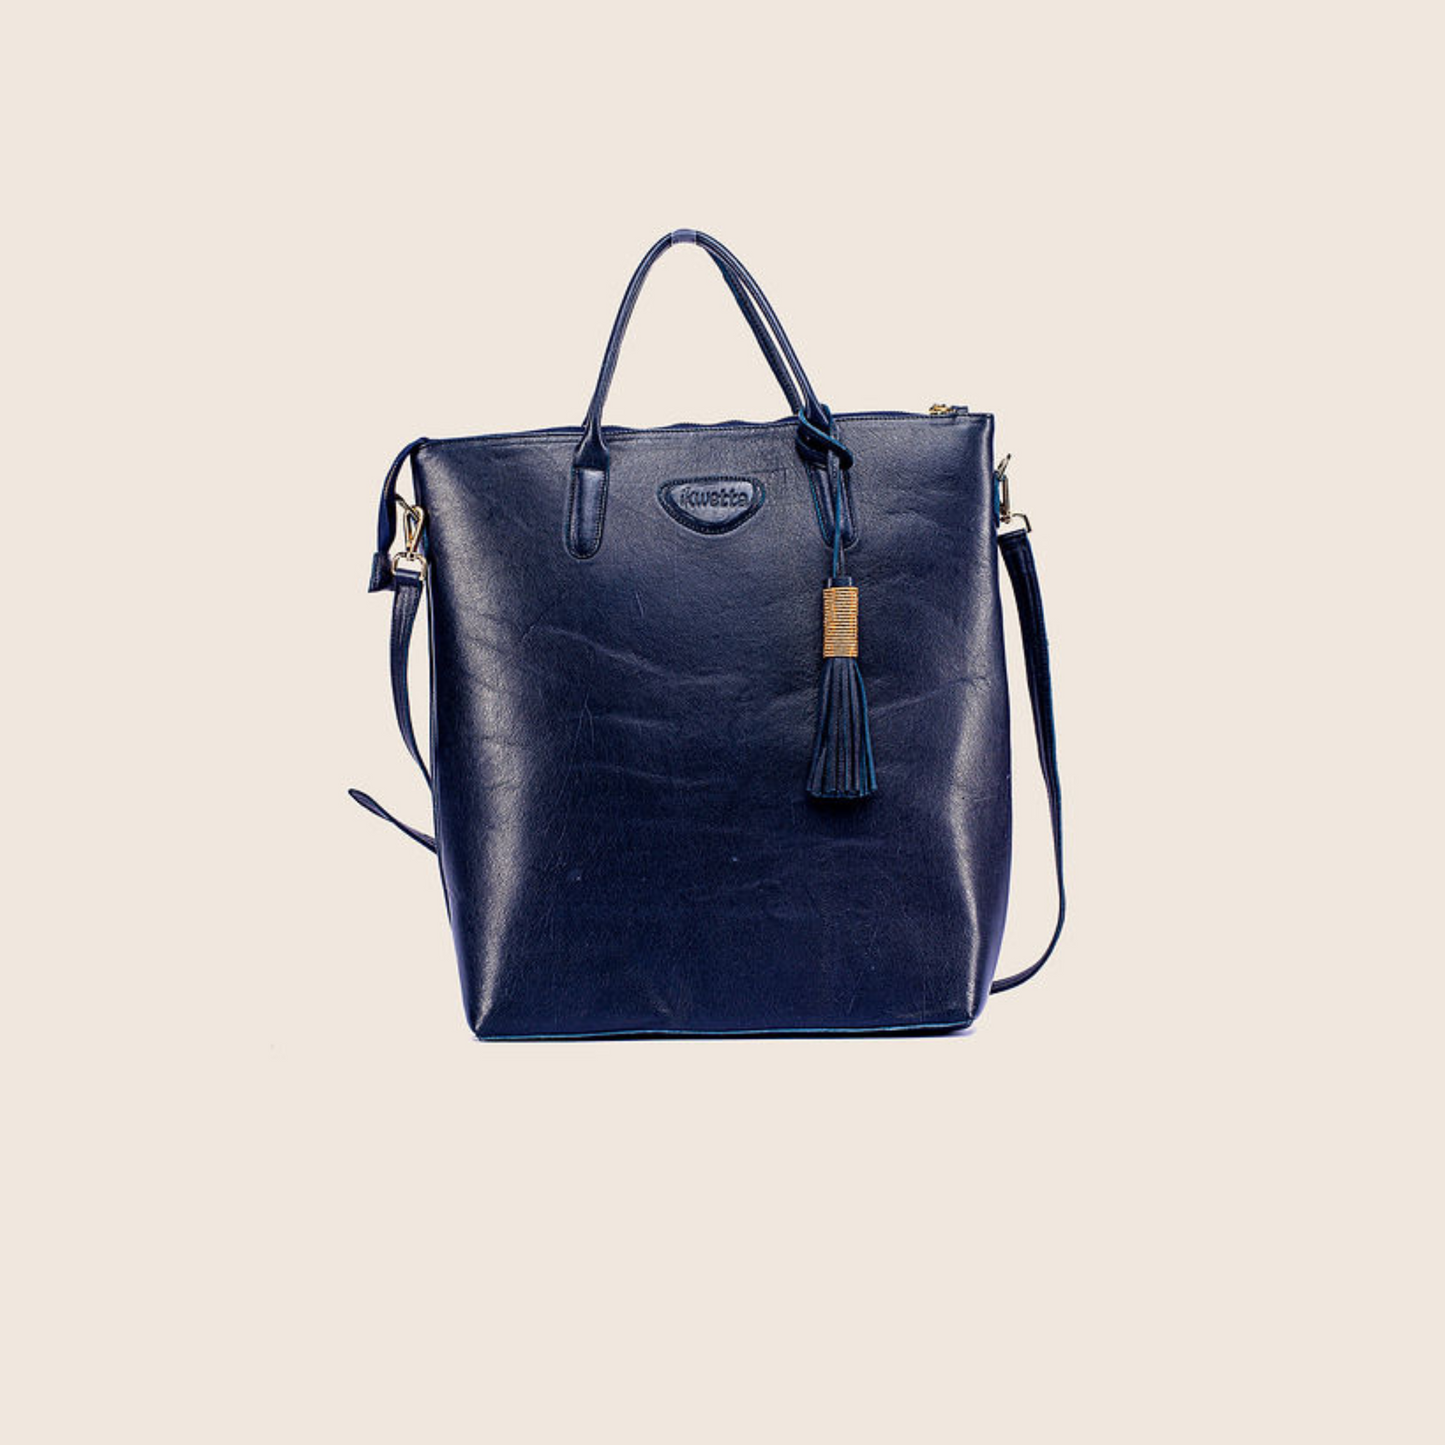 Werk tote in blue smooth leather